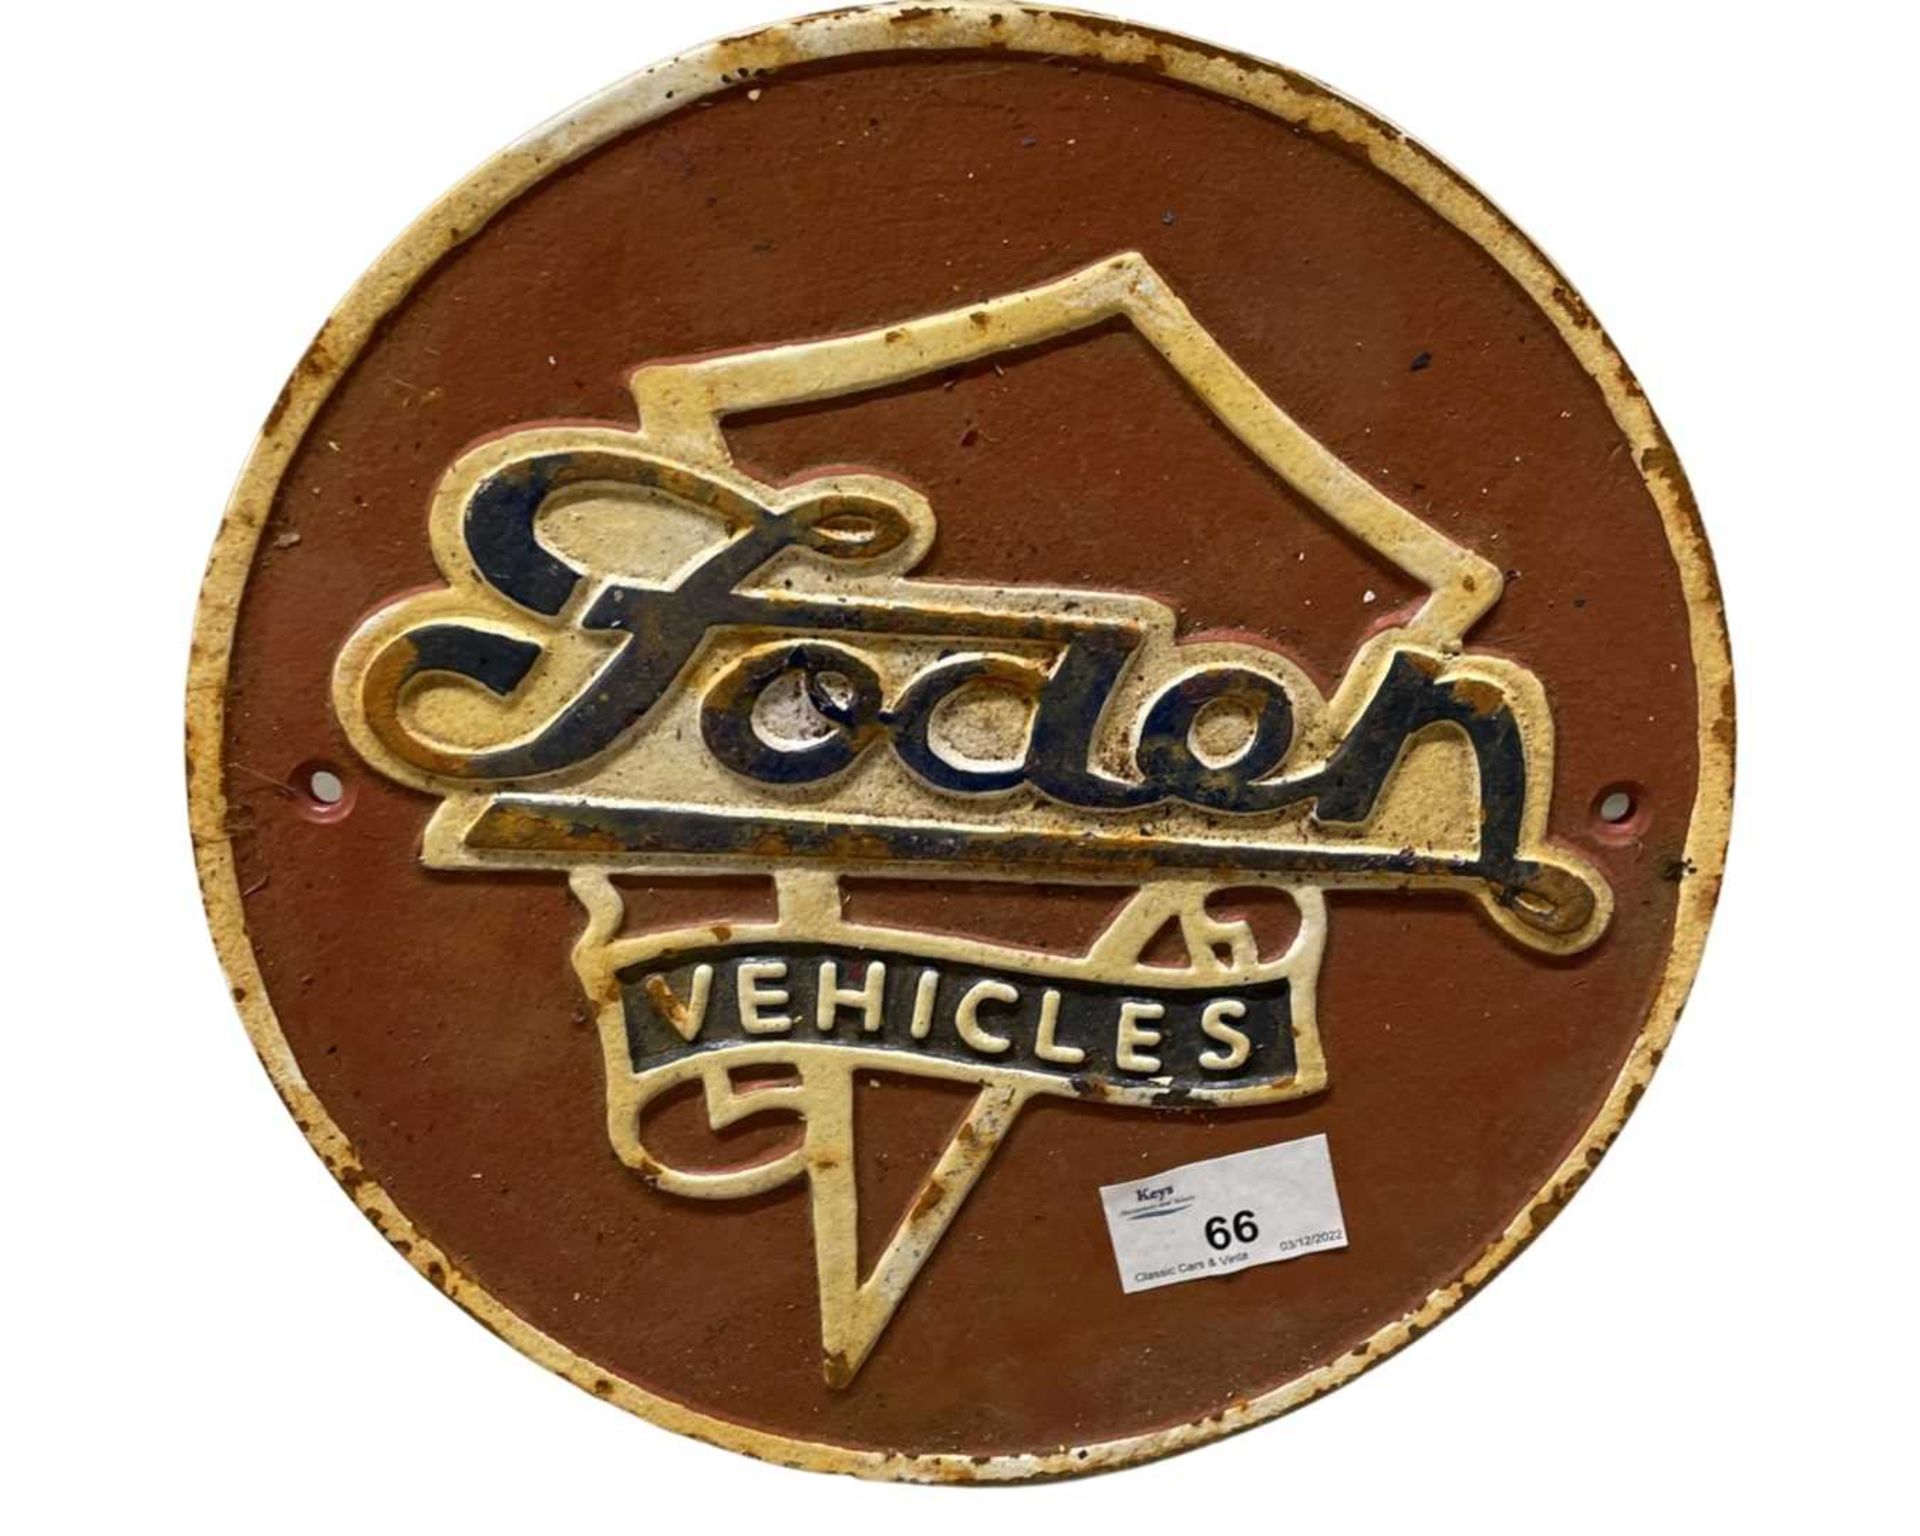 Cast iron Foden vehicle sign